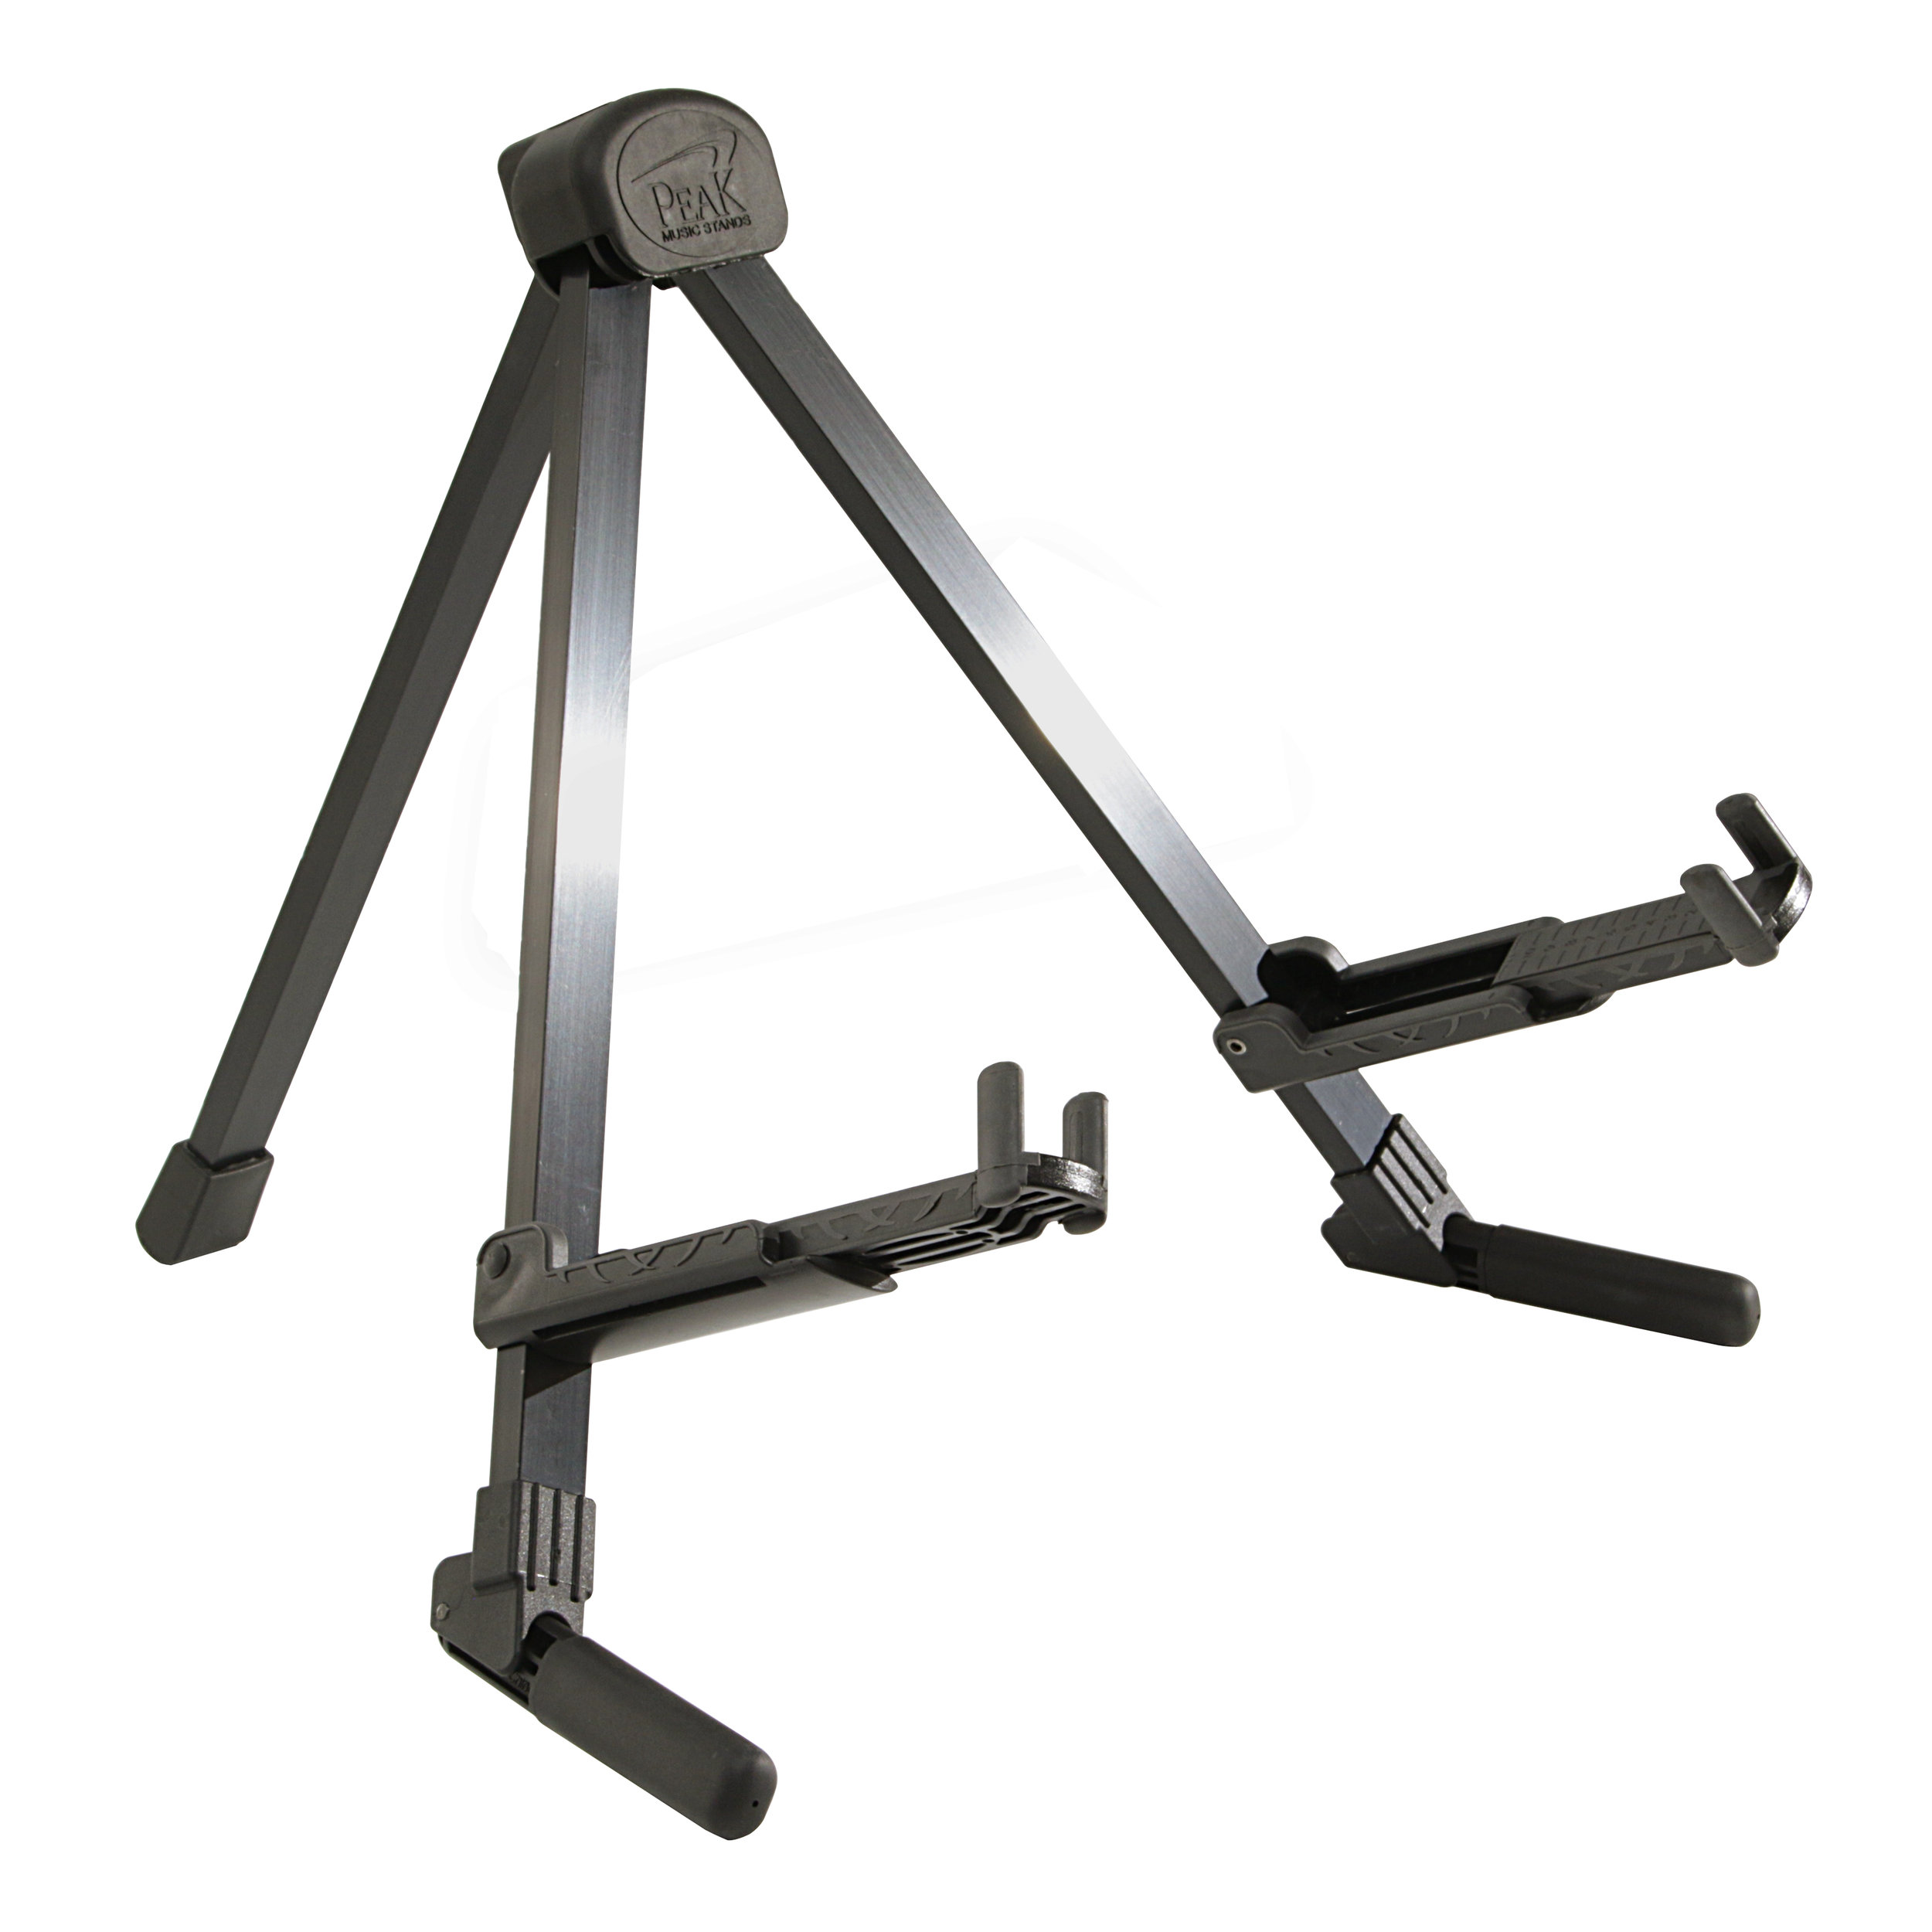 PEAK Instrument Stands — Peak Stands-The Best Portable Stands